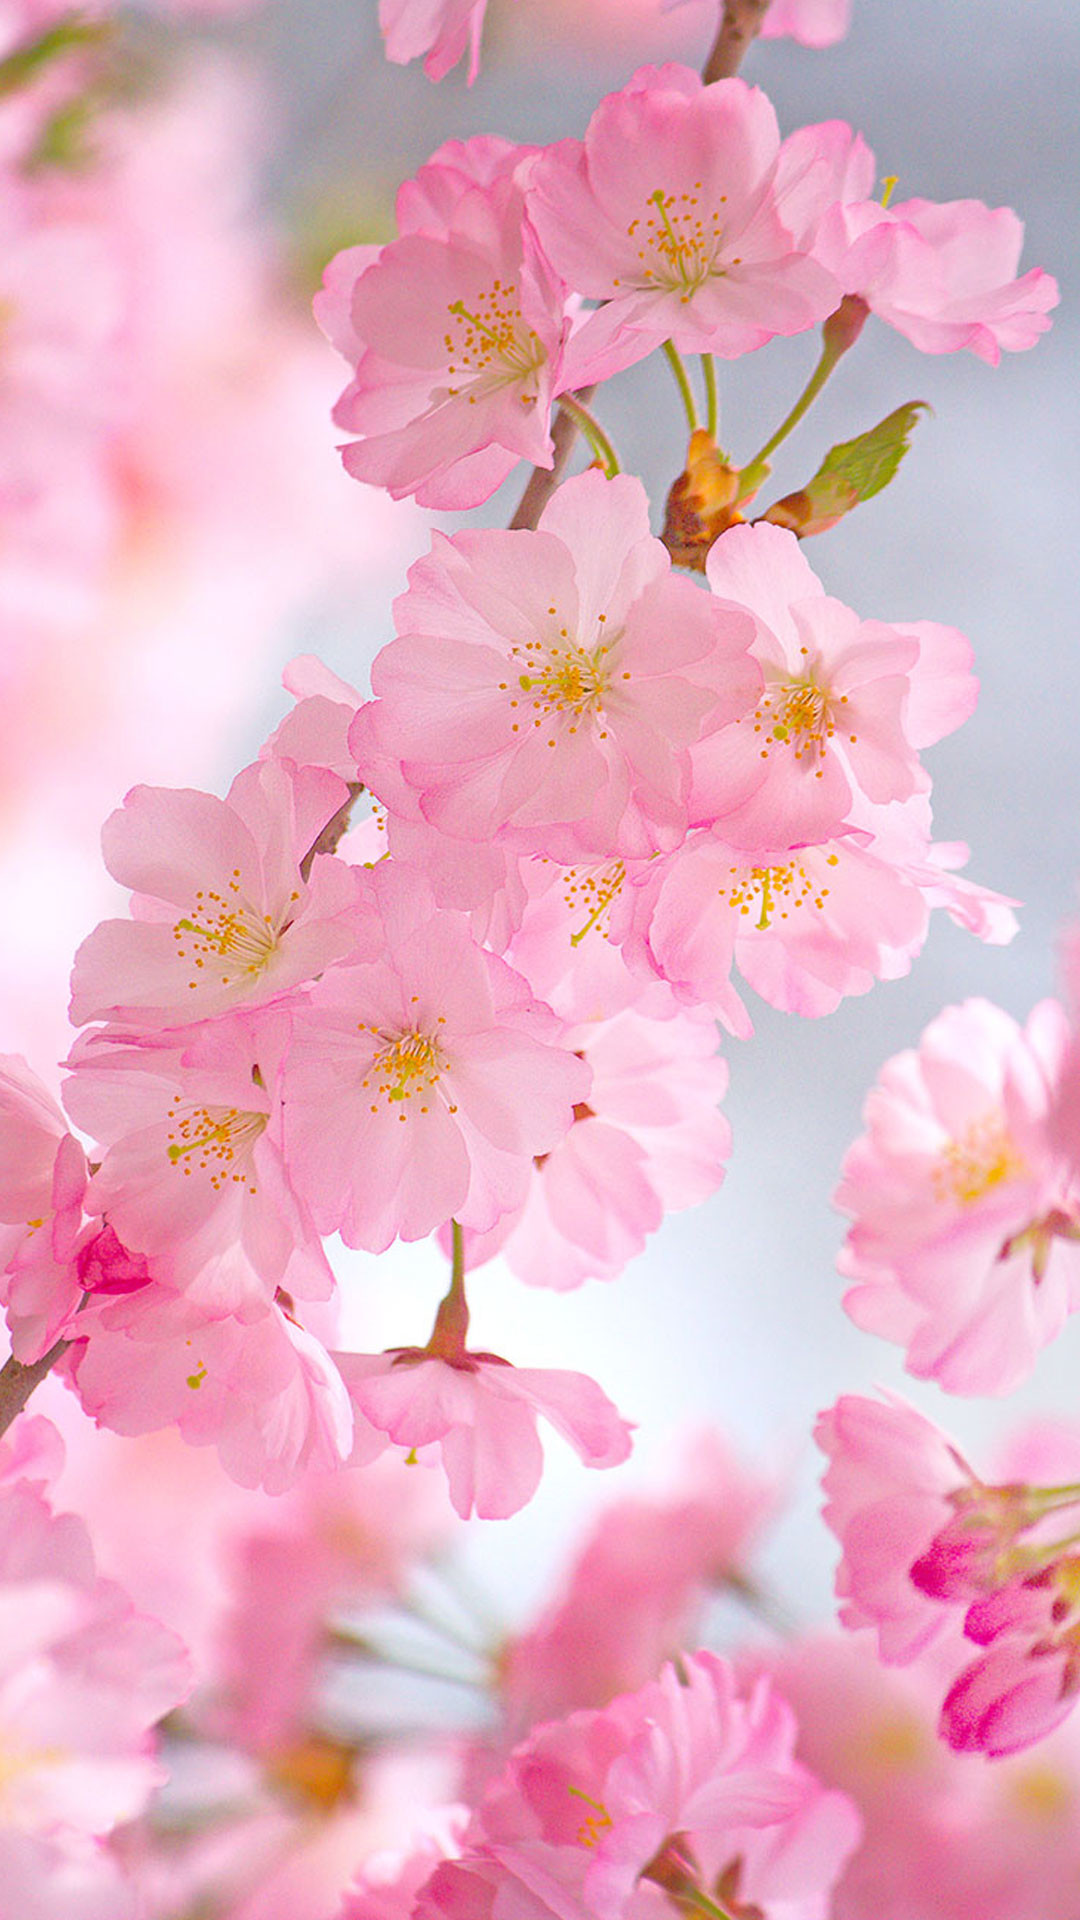 Cherry Blossom Iphone Wallpaper Discover more aesthetic Anime background  desktop high res  Landscape photography Cherry blossom wallpaper  Nature photography